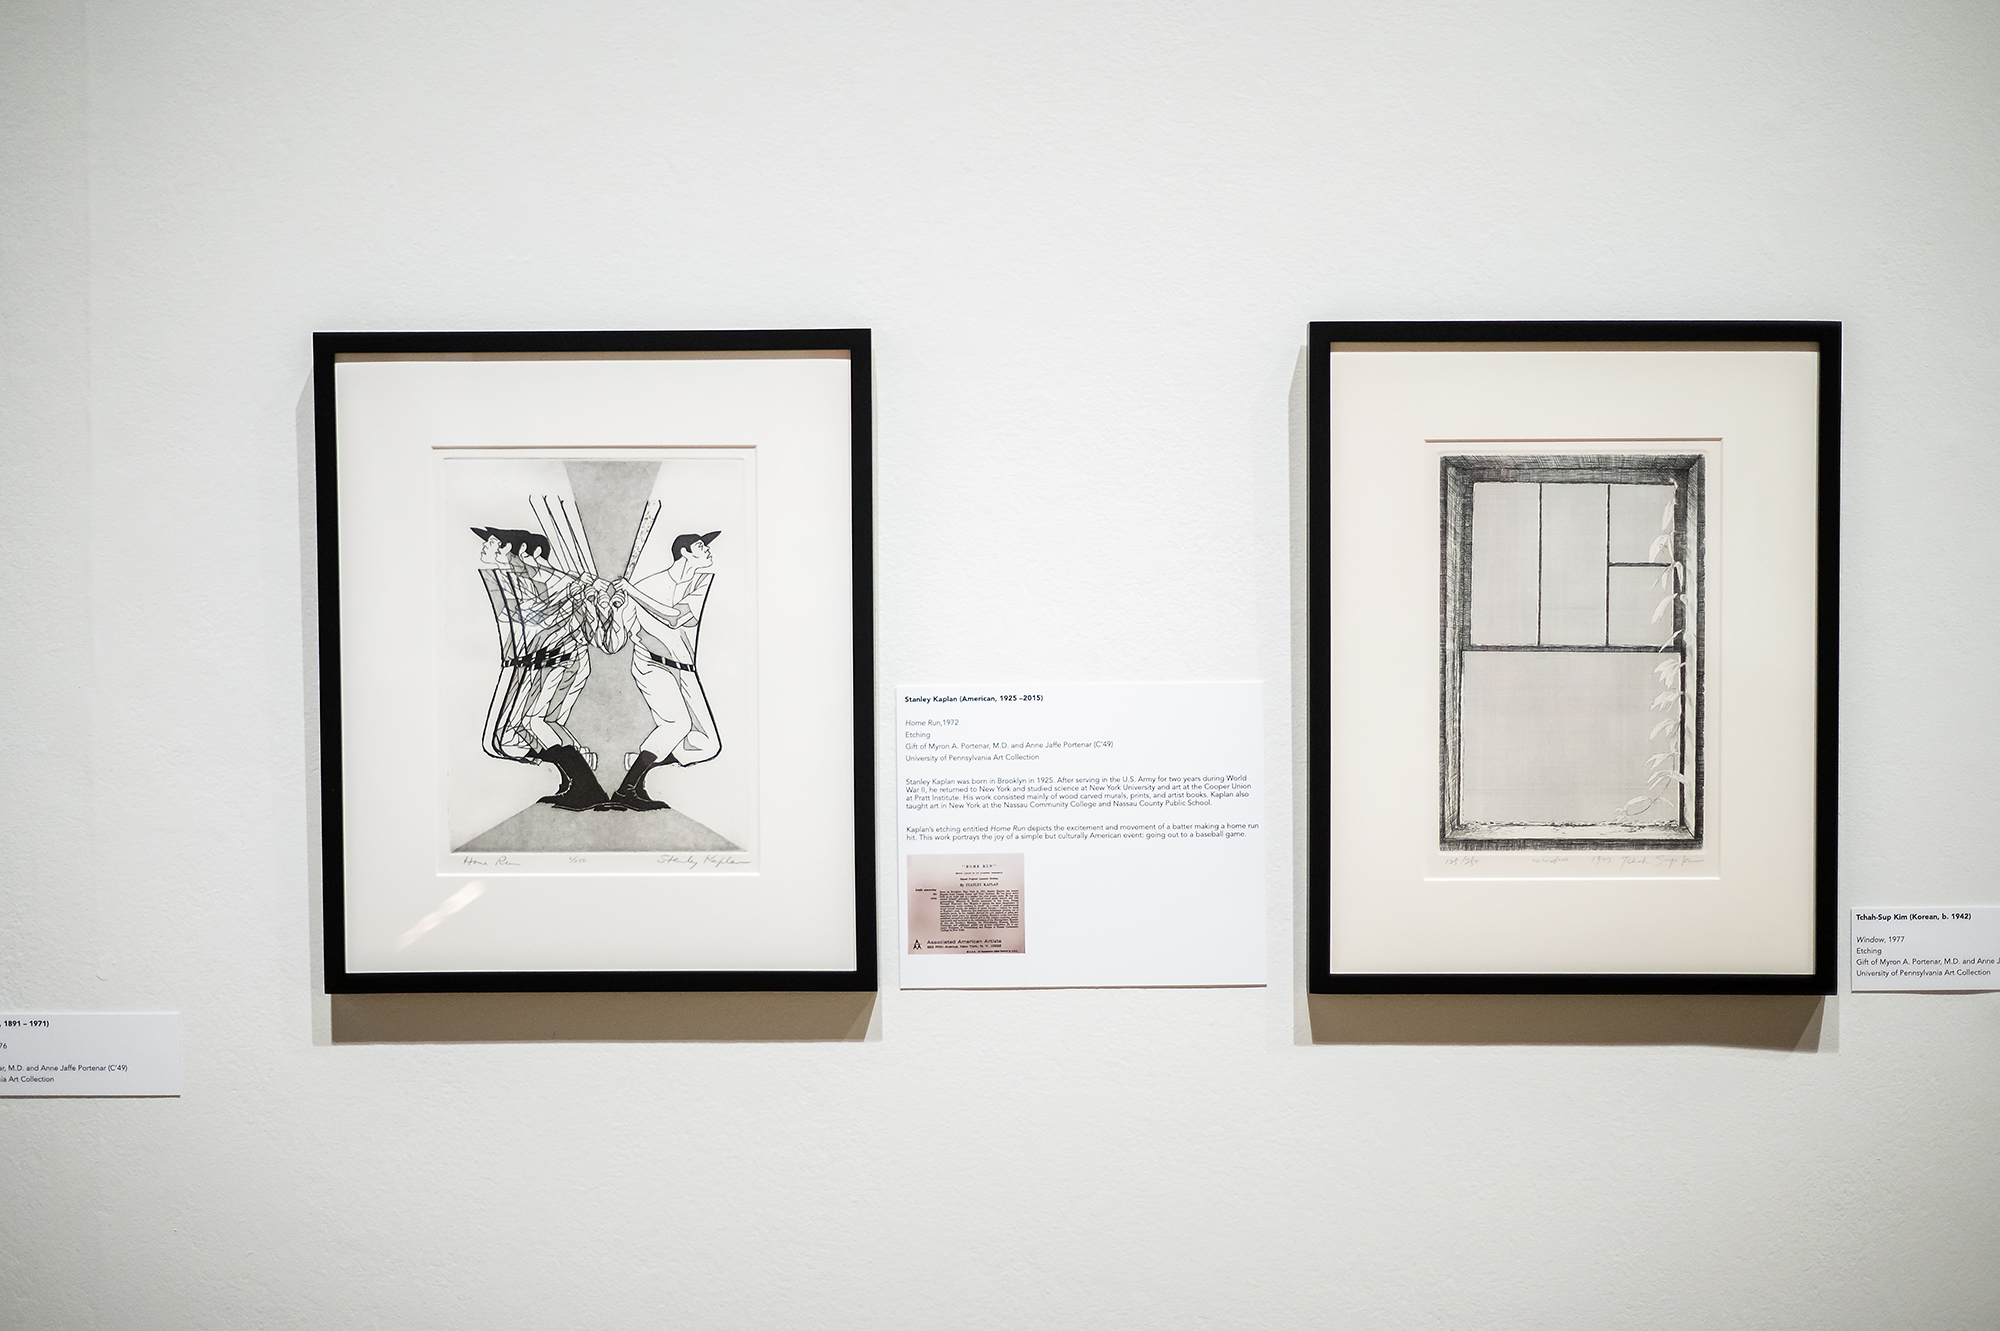 two prints on the gallery wall, one of a baseball player swinging a bat and the other of a window